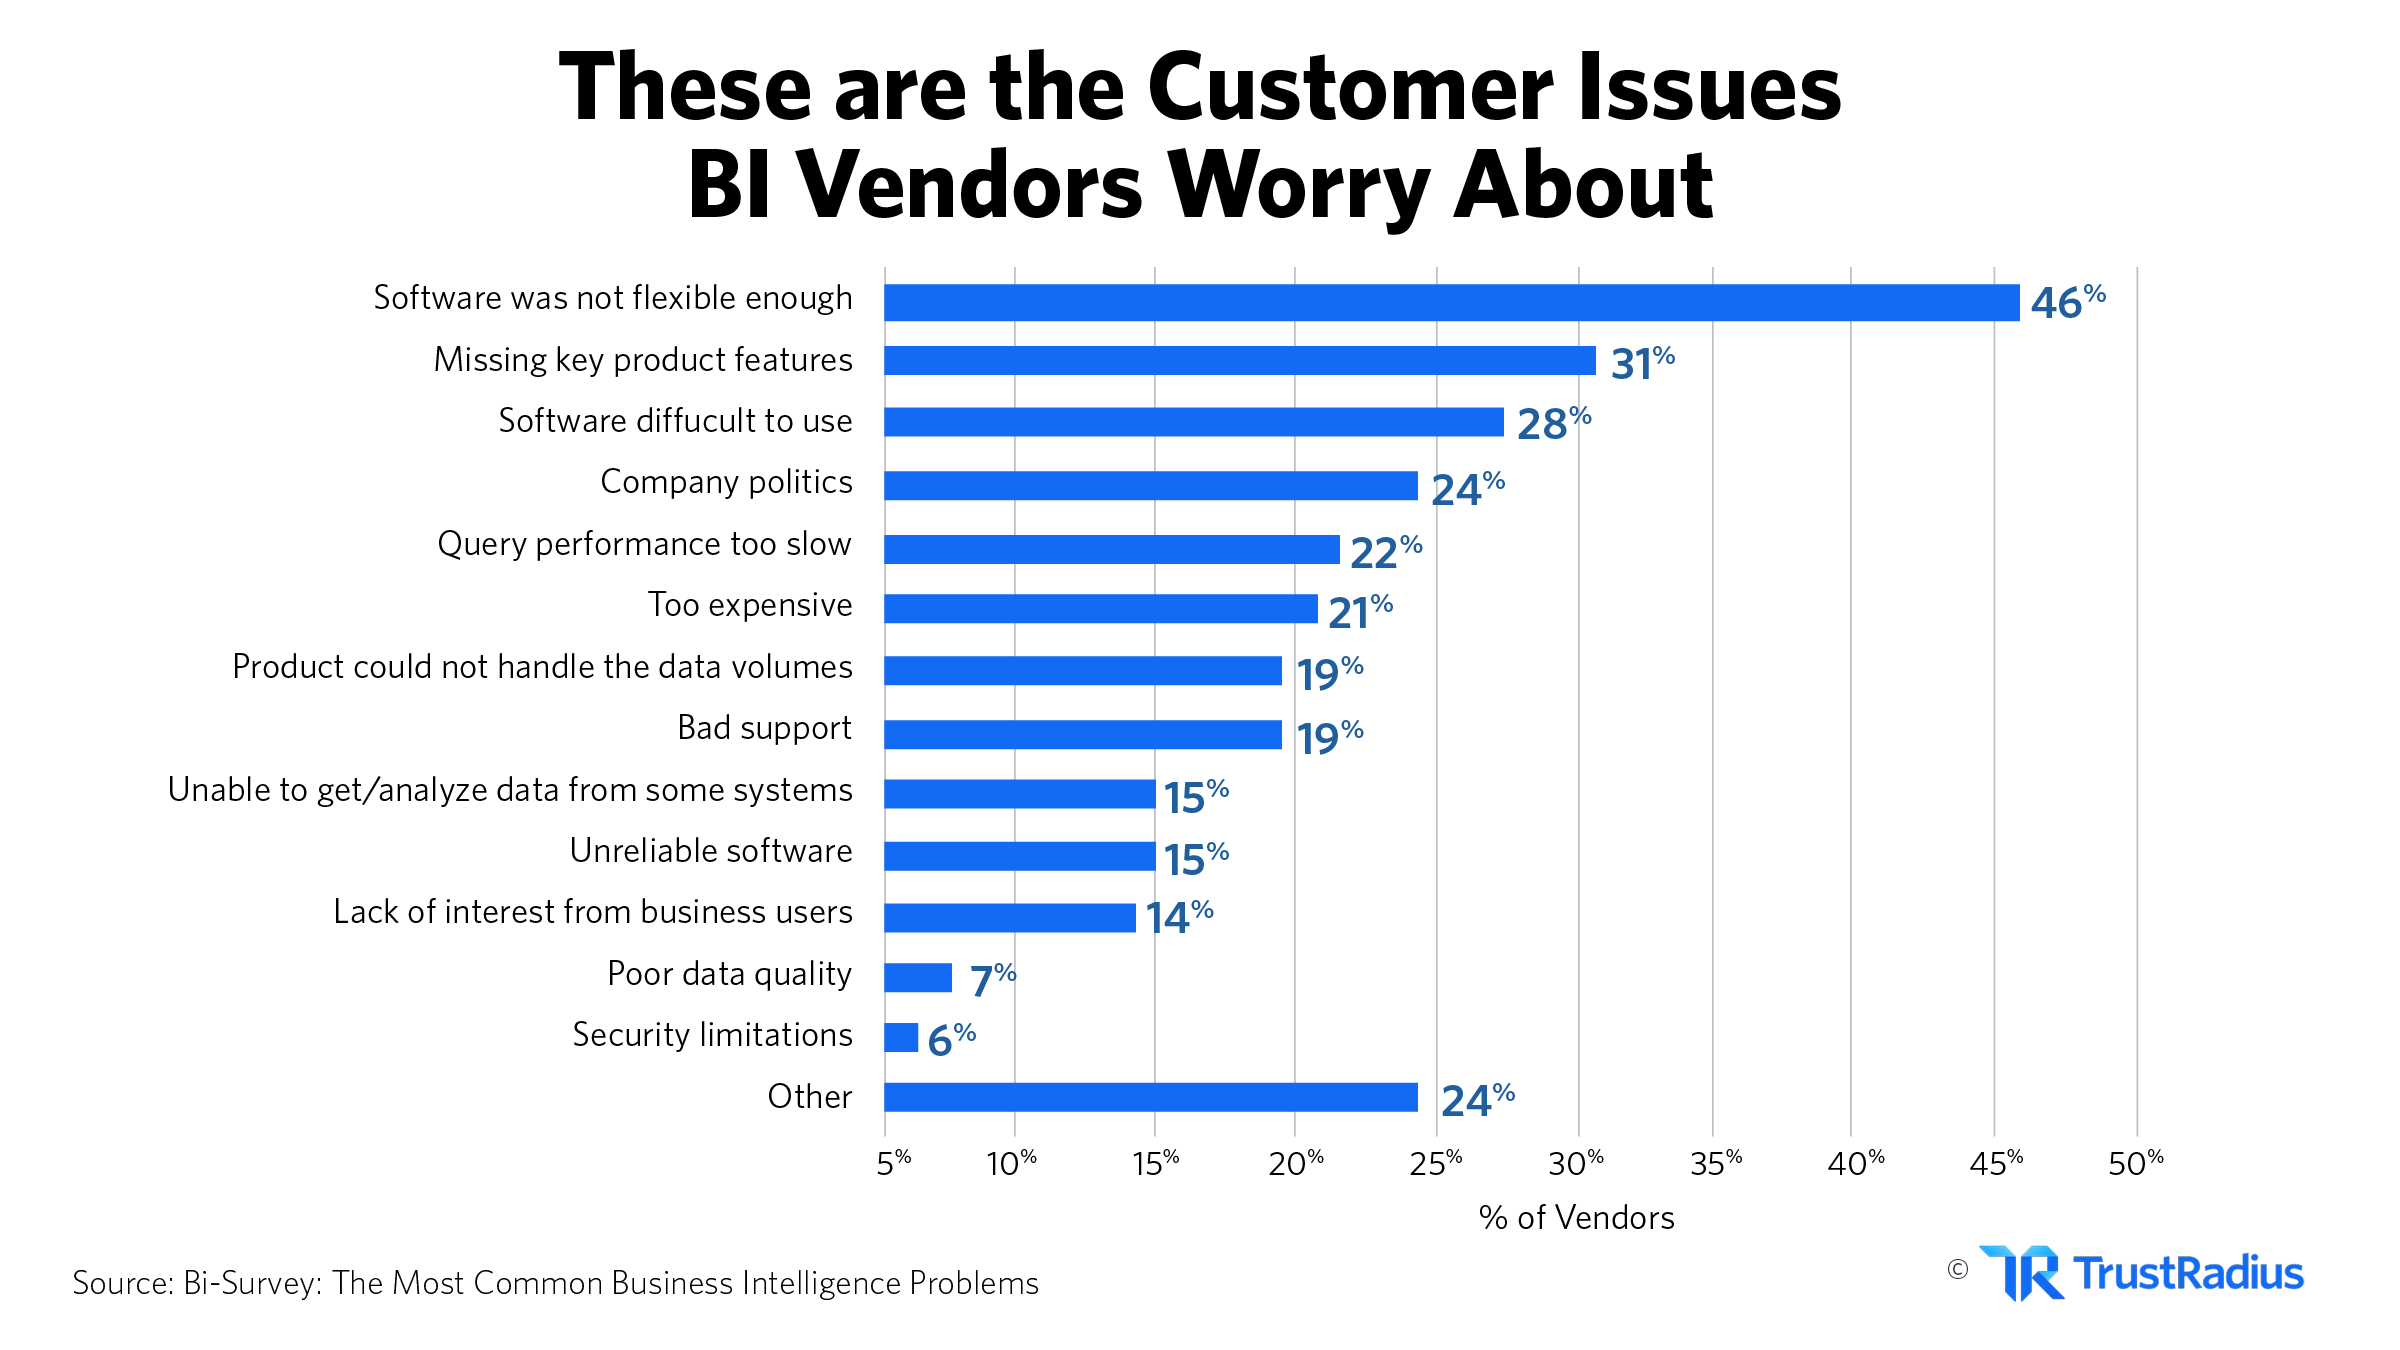 These are the issues BI customers worry about